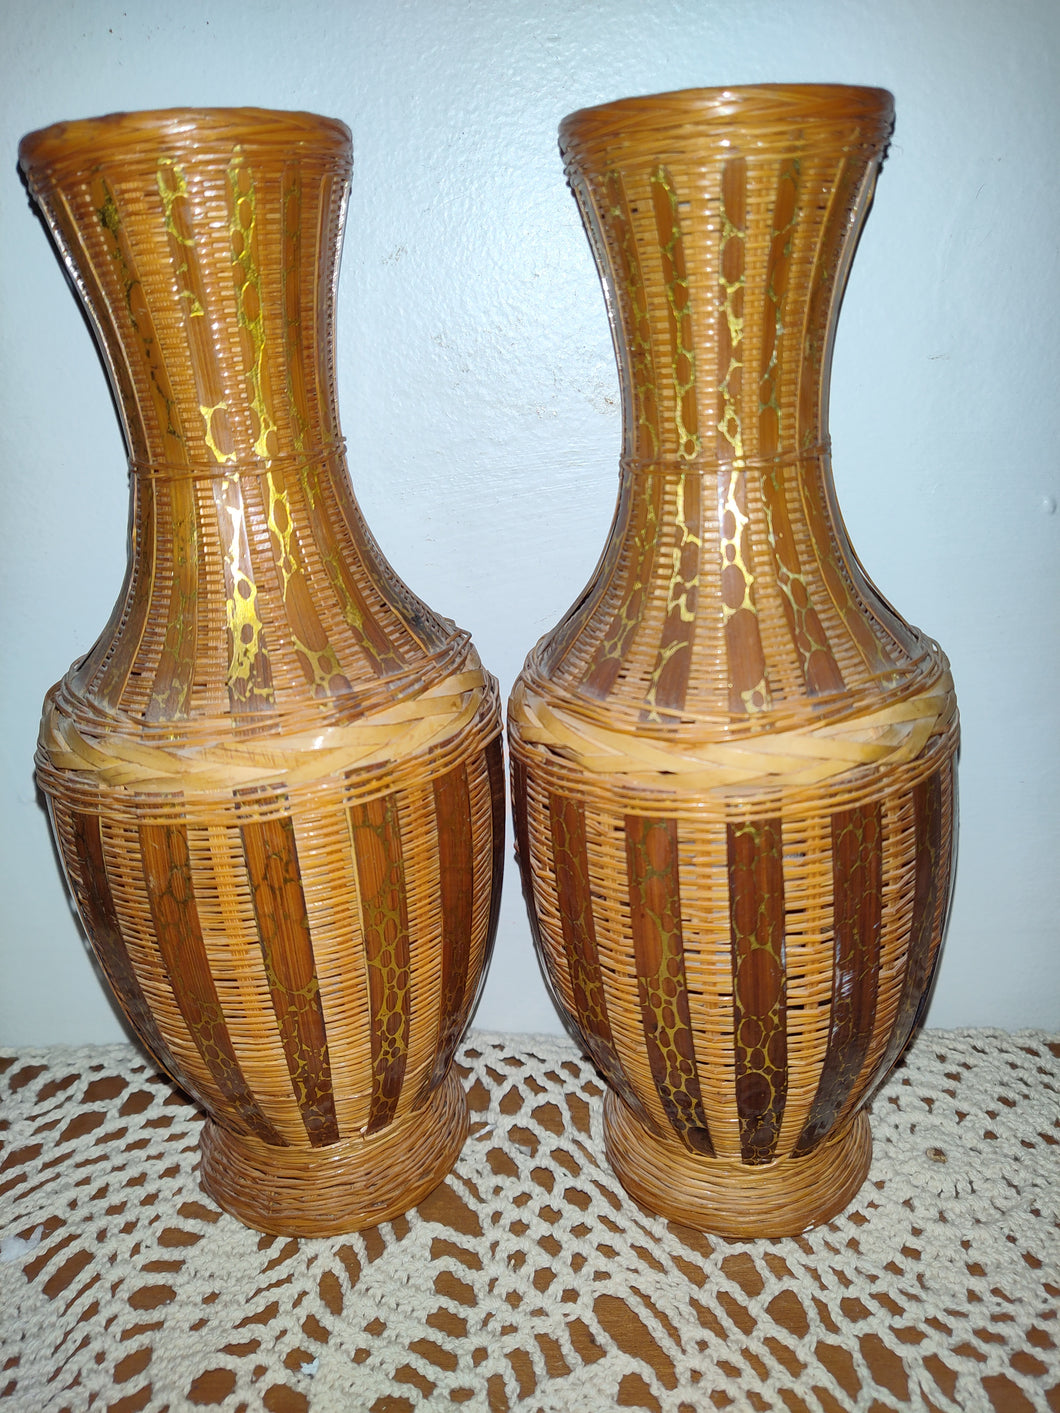 Shanghai Chinese Hand Made Vtg Woven Wicker Rattan Vase Small, With Wood Insert